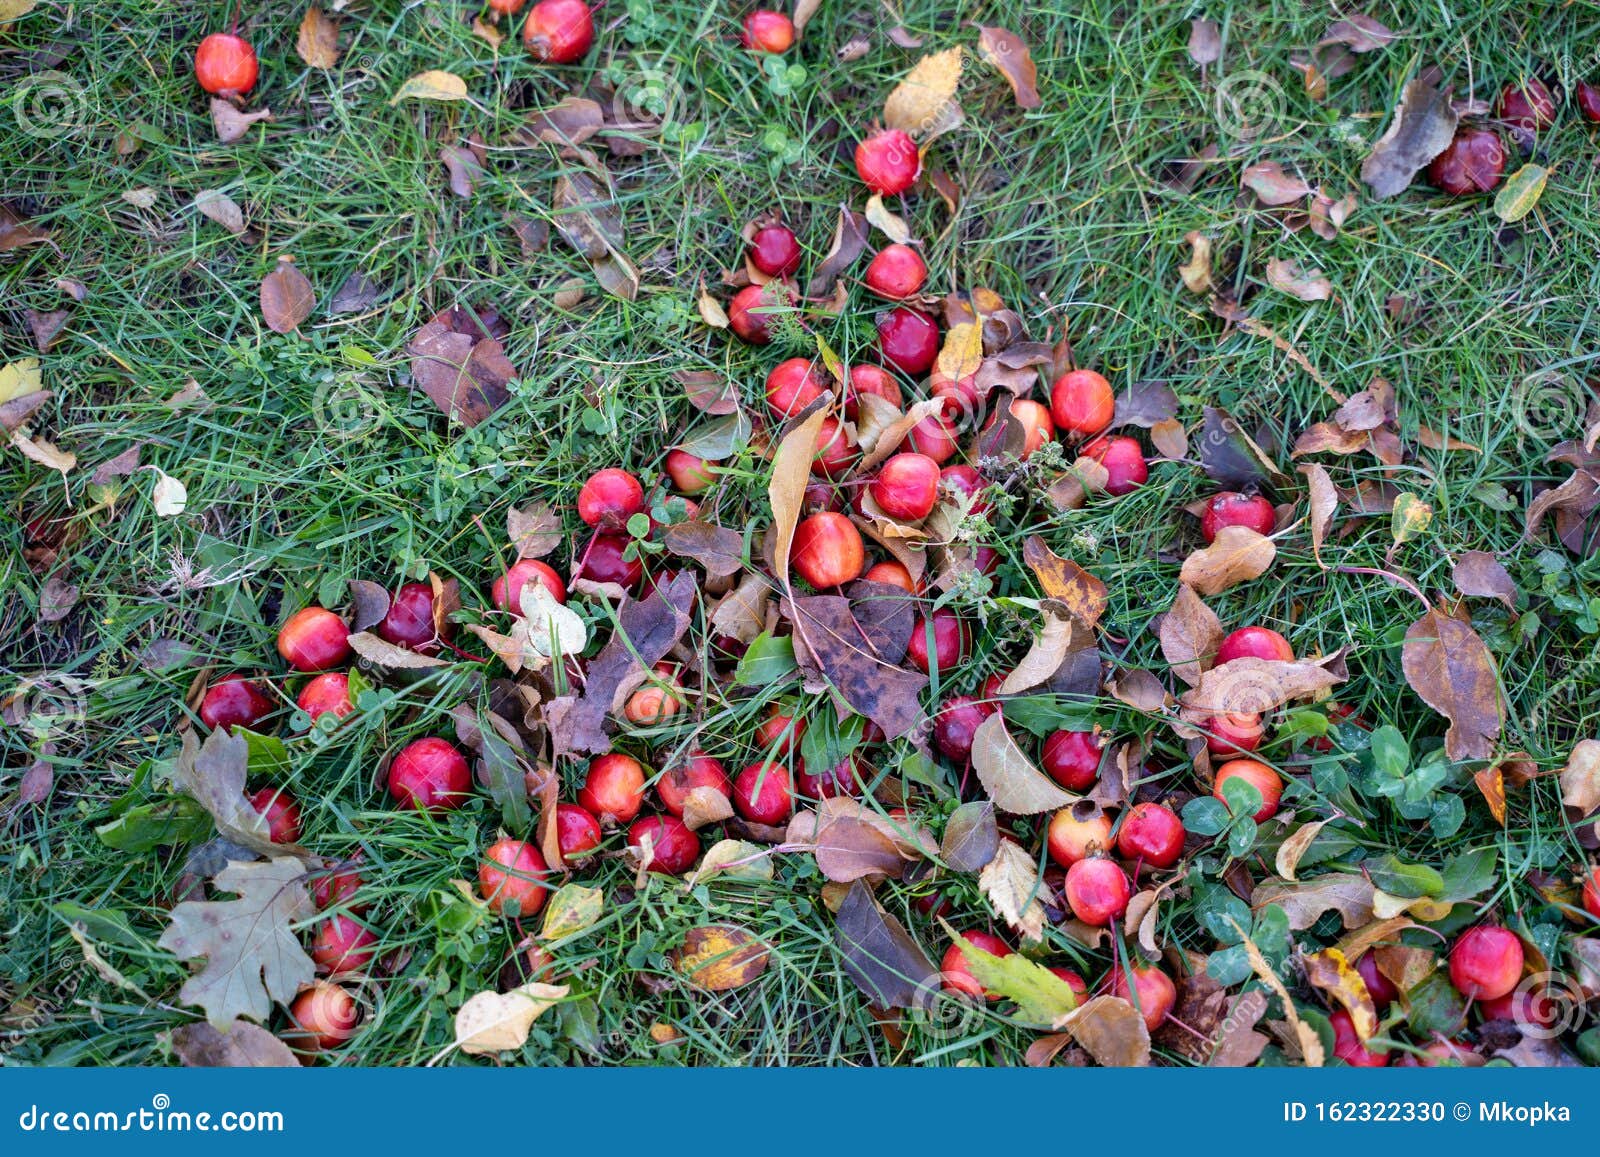 ripe cherries on the ground from a nearby cherry tree, some are squished